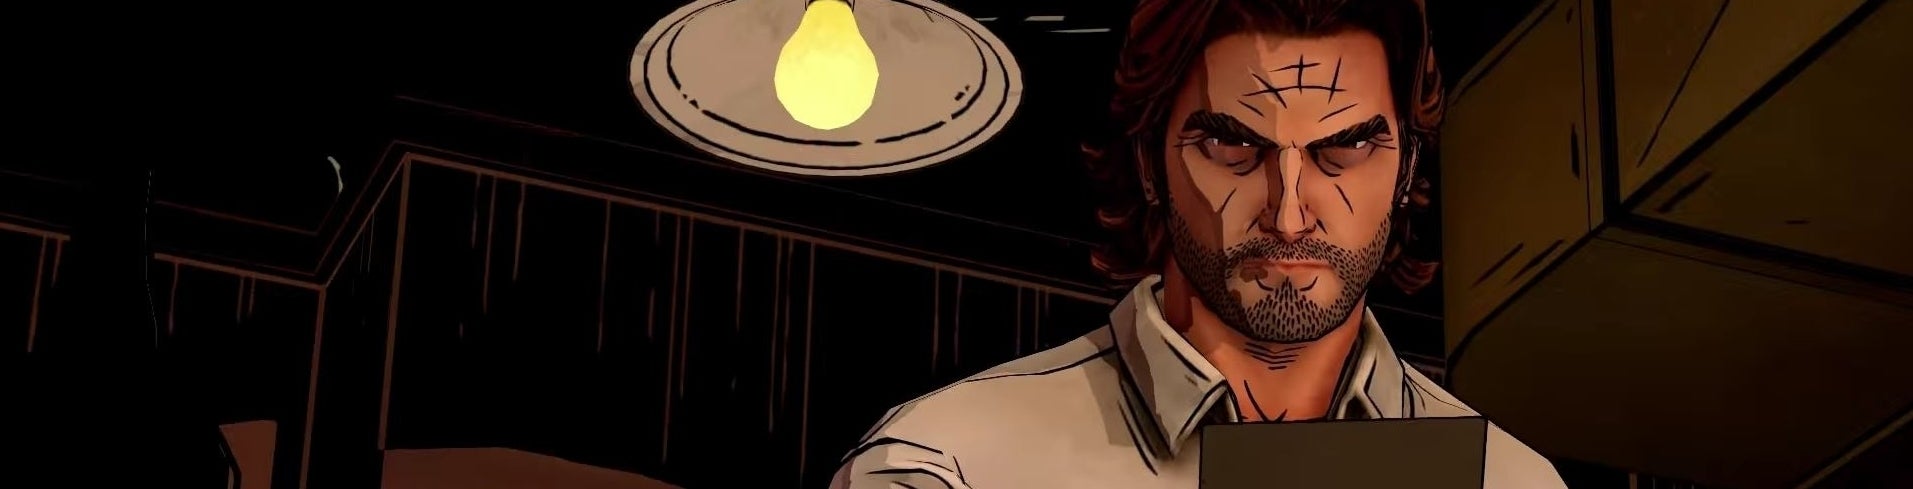 Bilder zu The Wolf Among Us, Episode 3: A Crooked Mile - Test